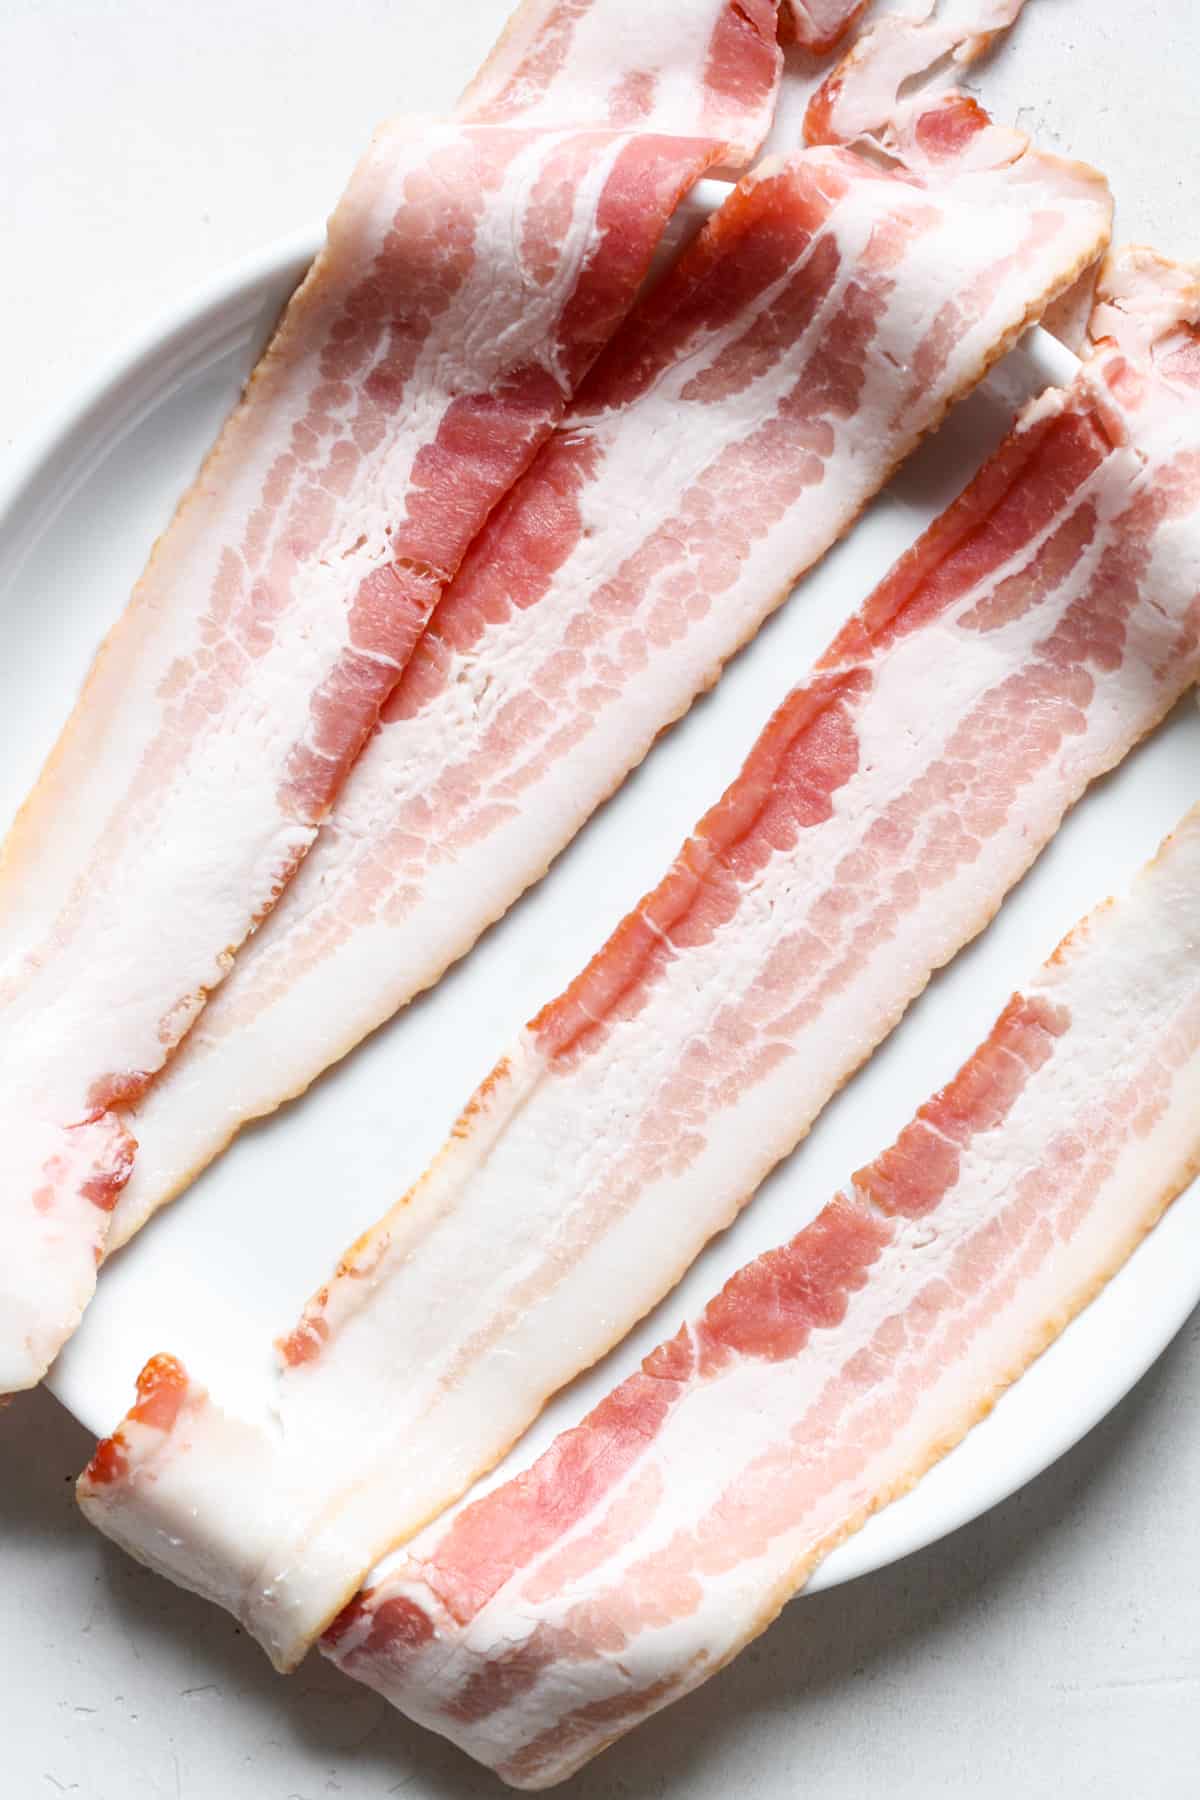 Raw bacon on plate